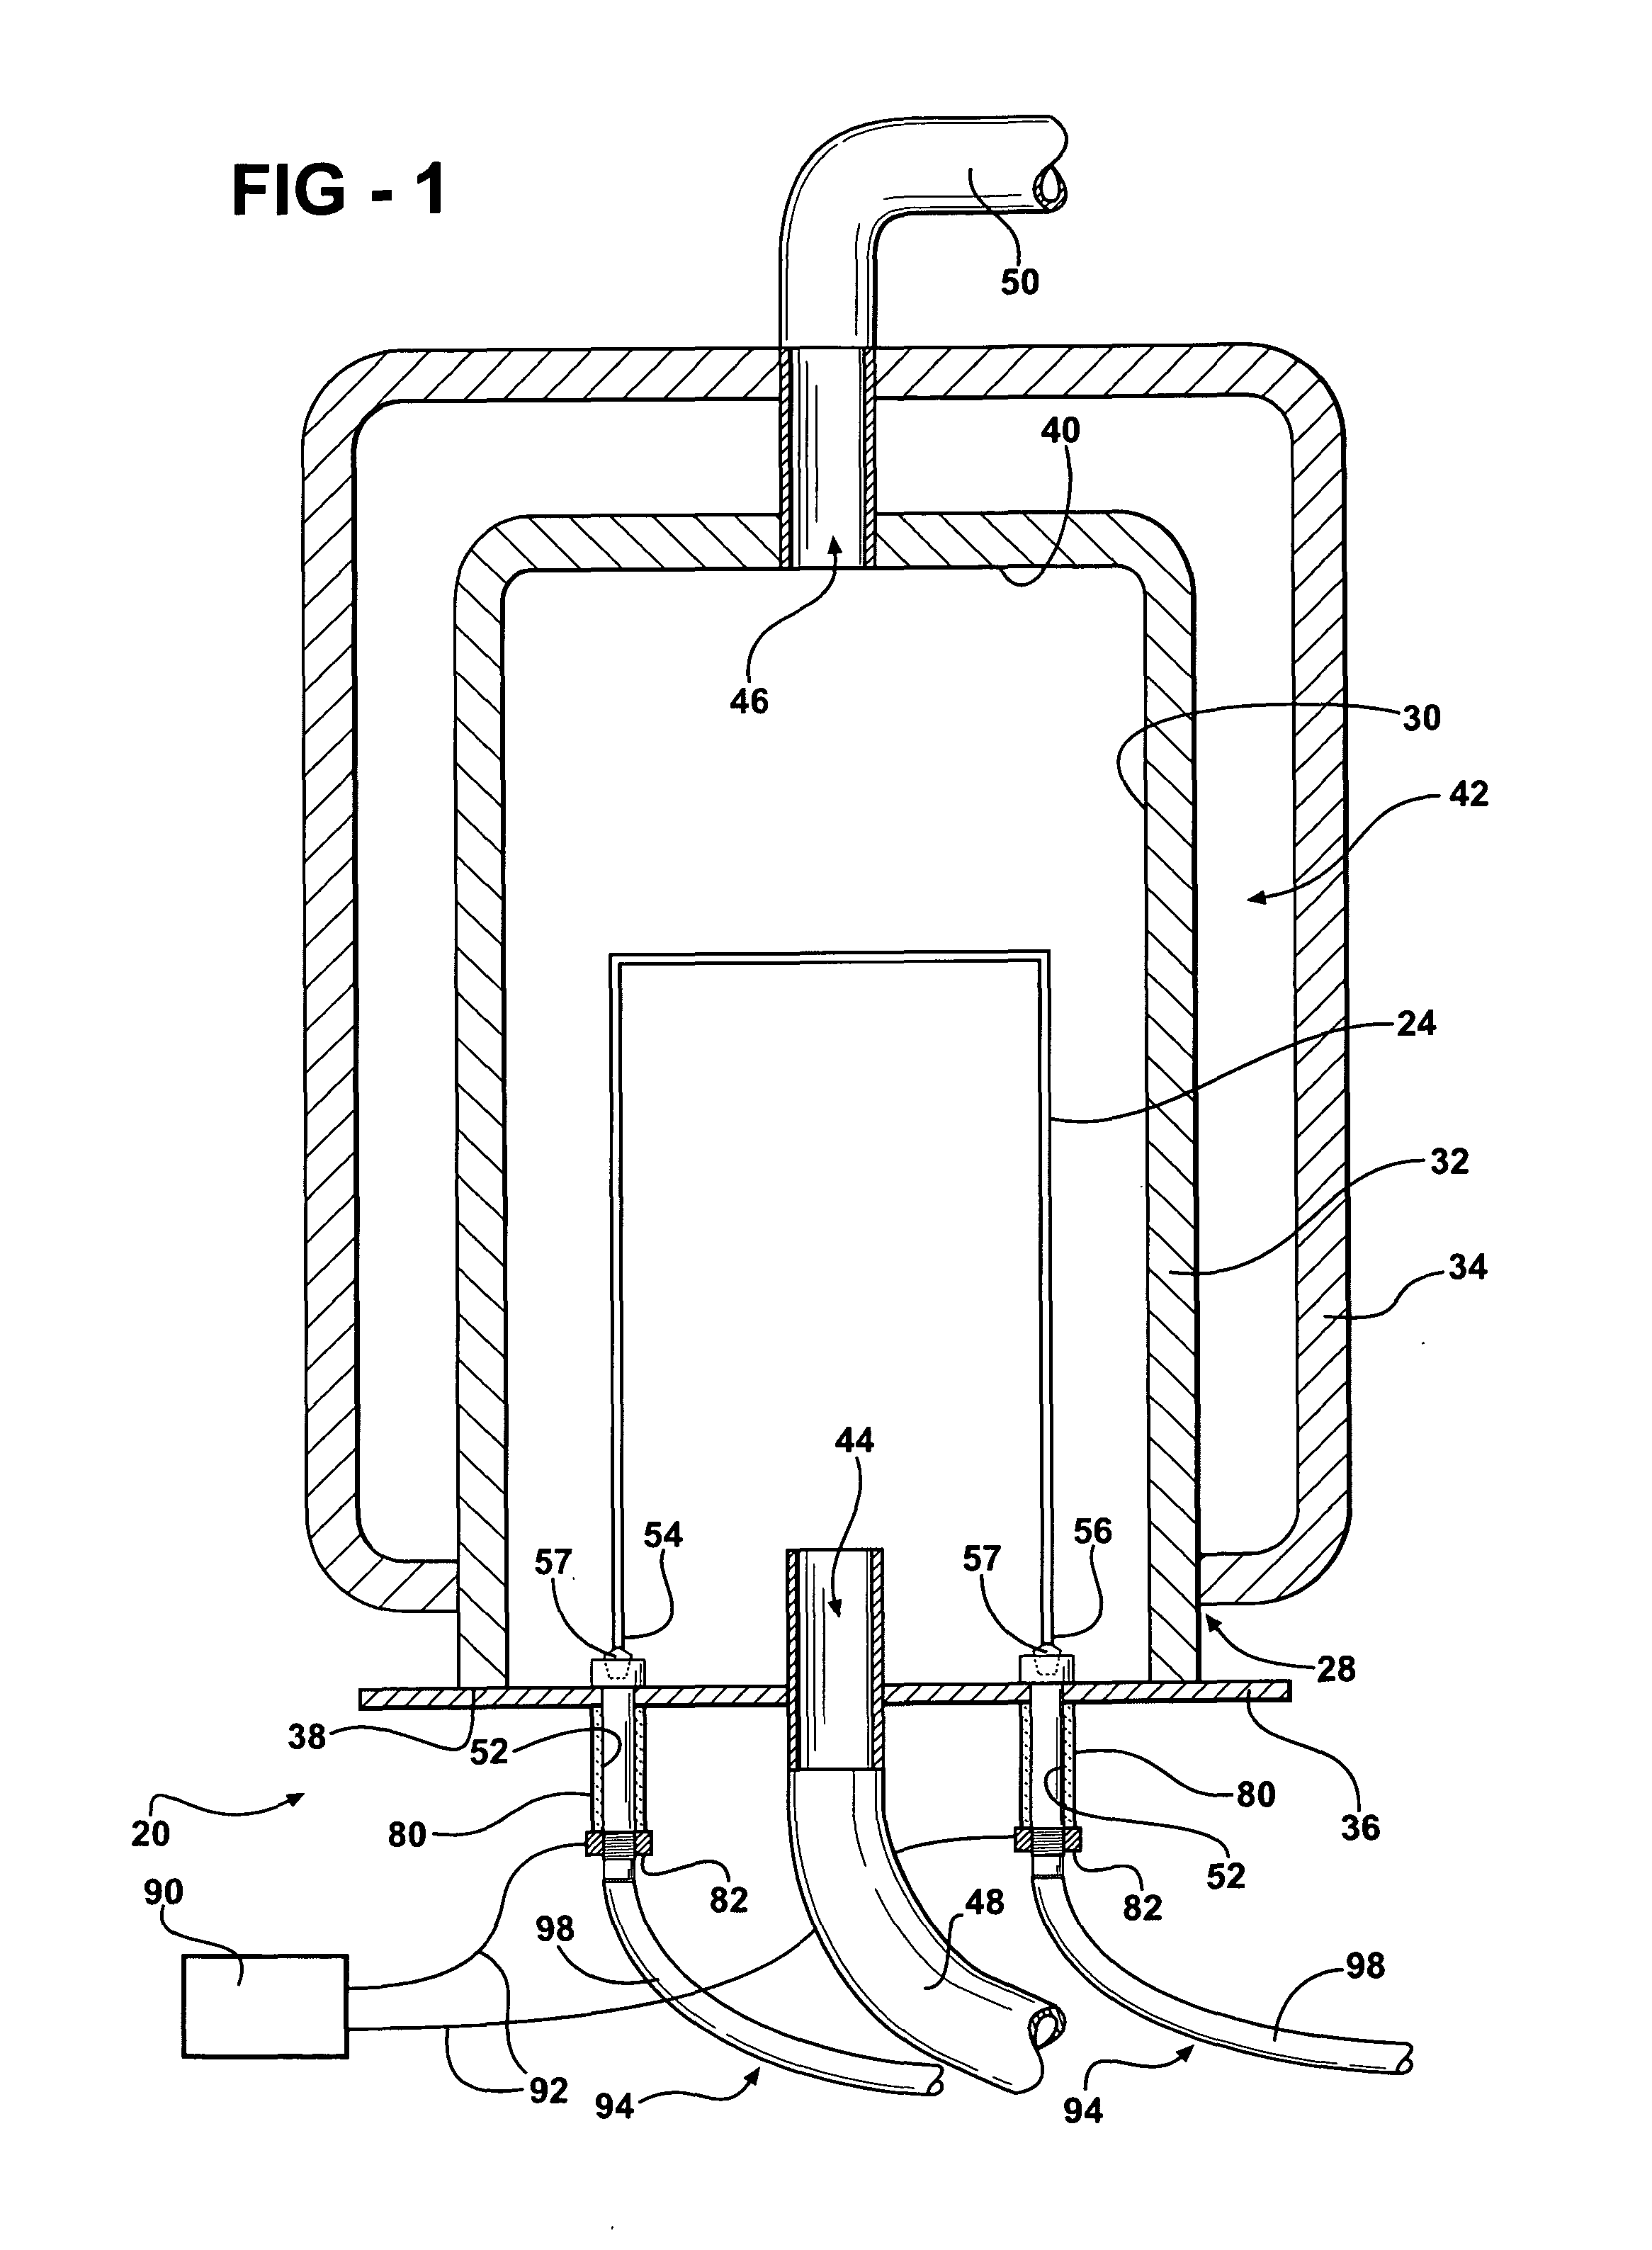 Manufacturing Apparatus For Depositing A Material And An Electrode For Use Therein